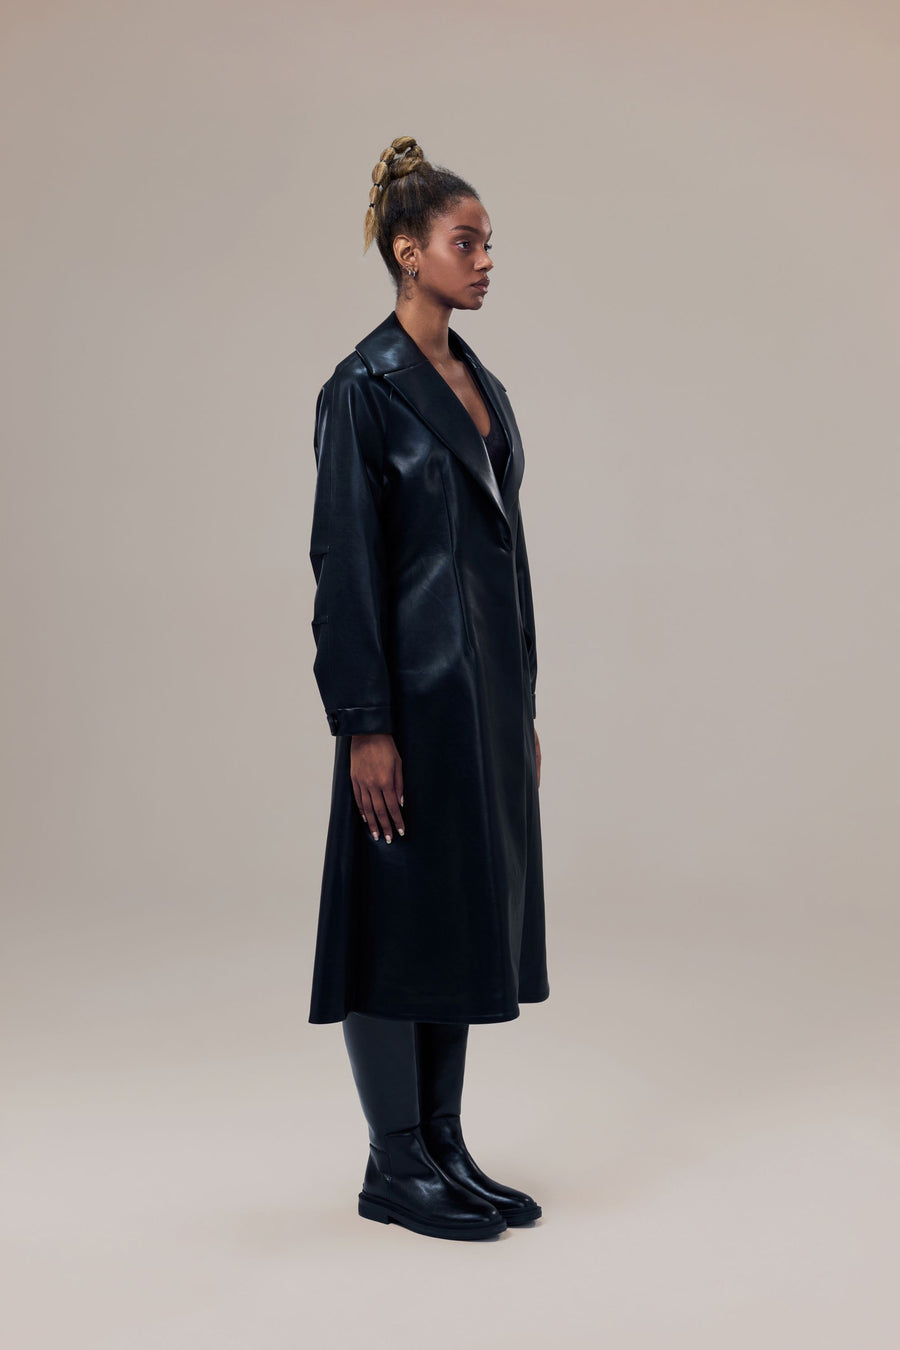 Miller Waterproof Sustainable Vegan Leather Trench with Flared Skirt